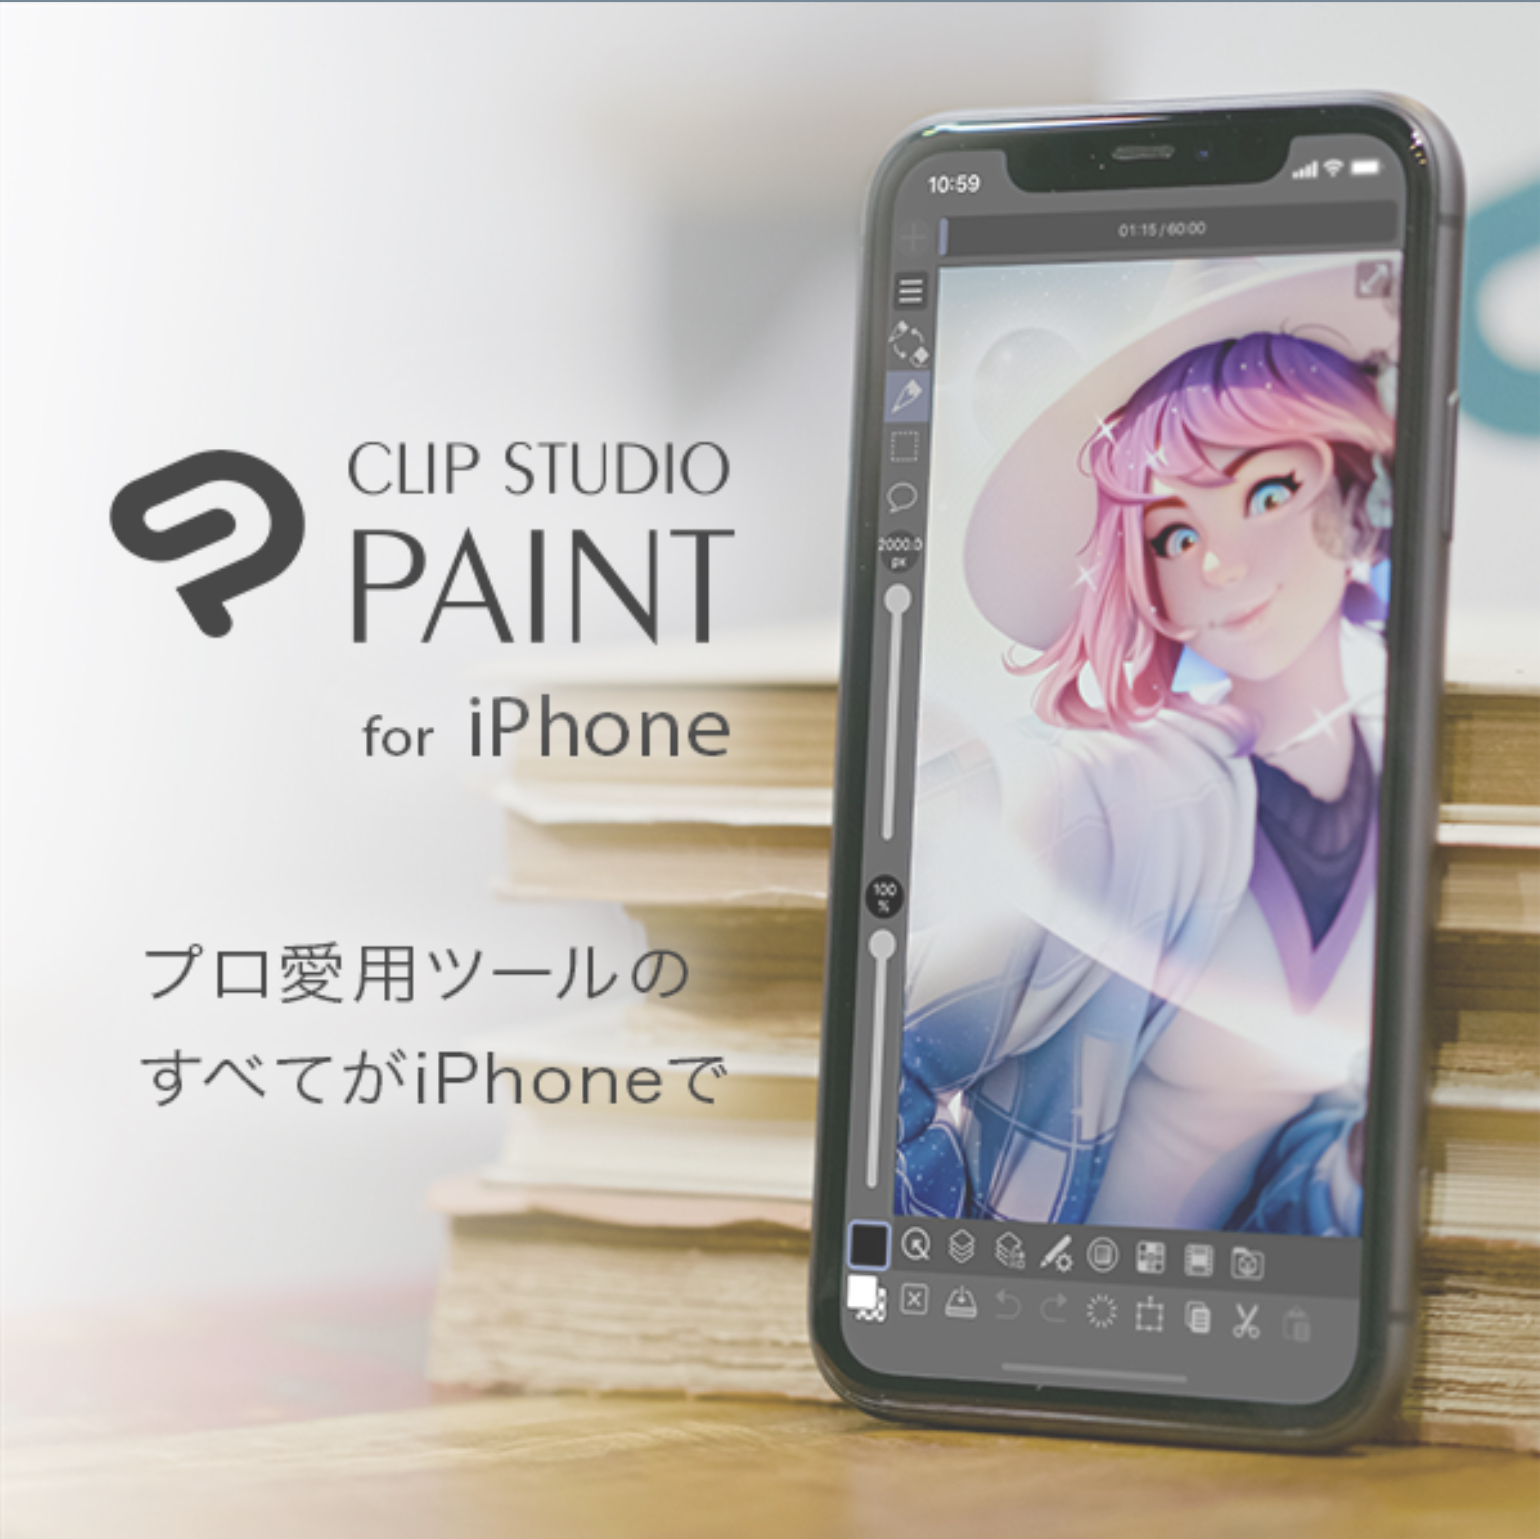 CLIP STUDIO PAINT for iPhone 登場!!